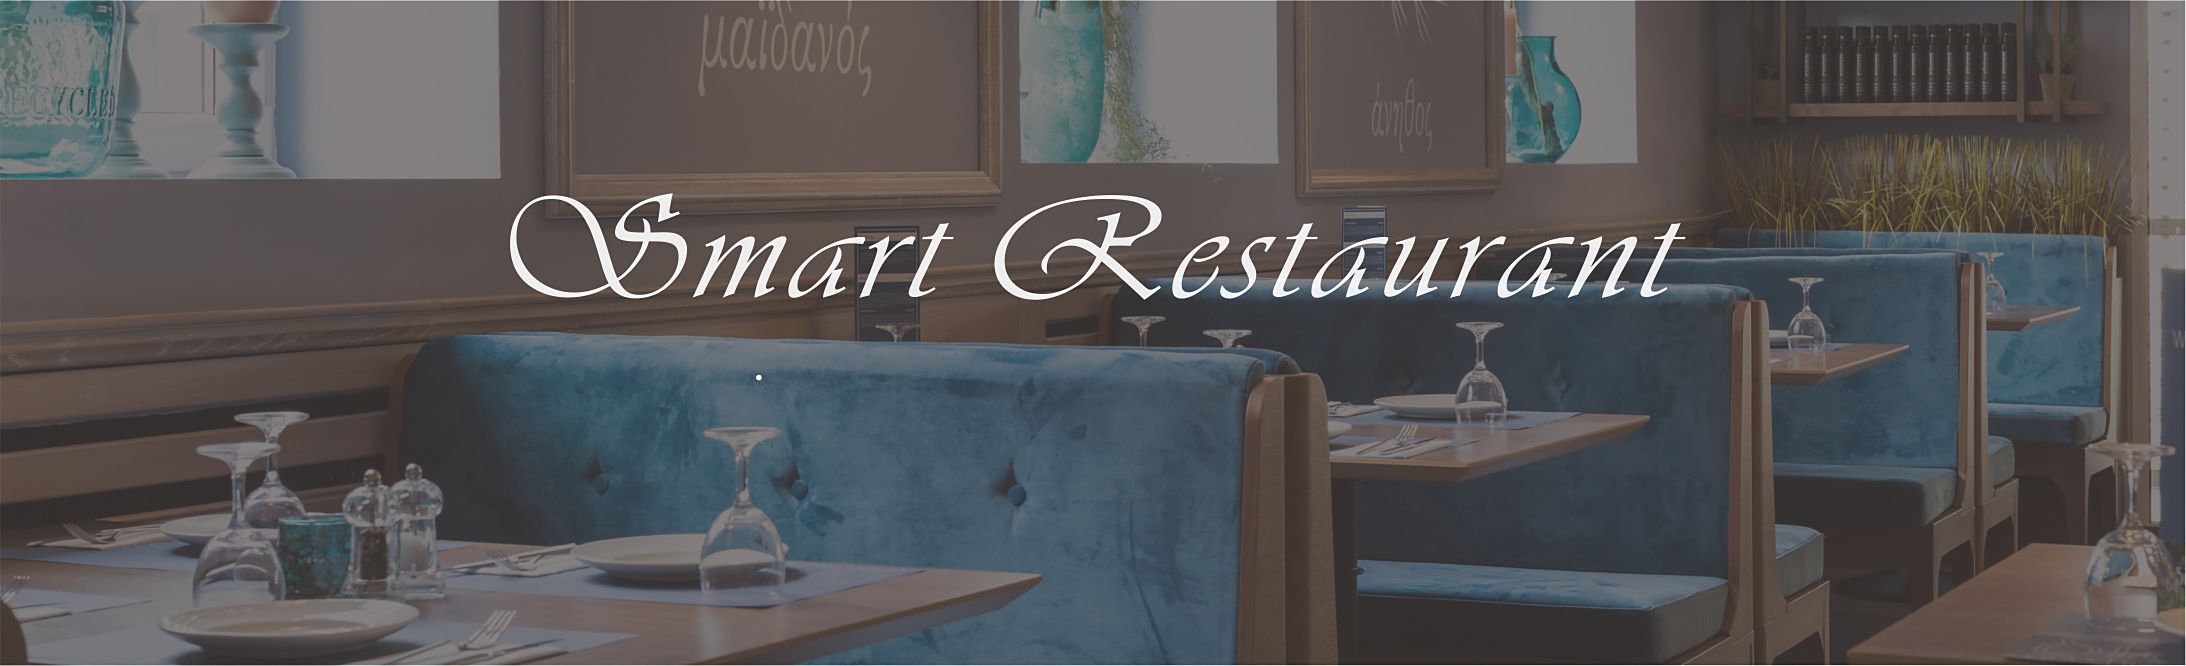 Smart Restaurant & Intelligent and Efficient Meal Delivery